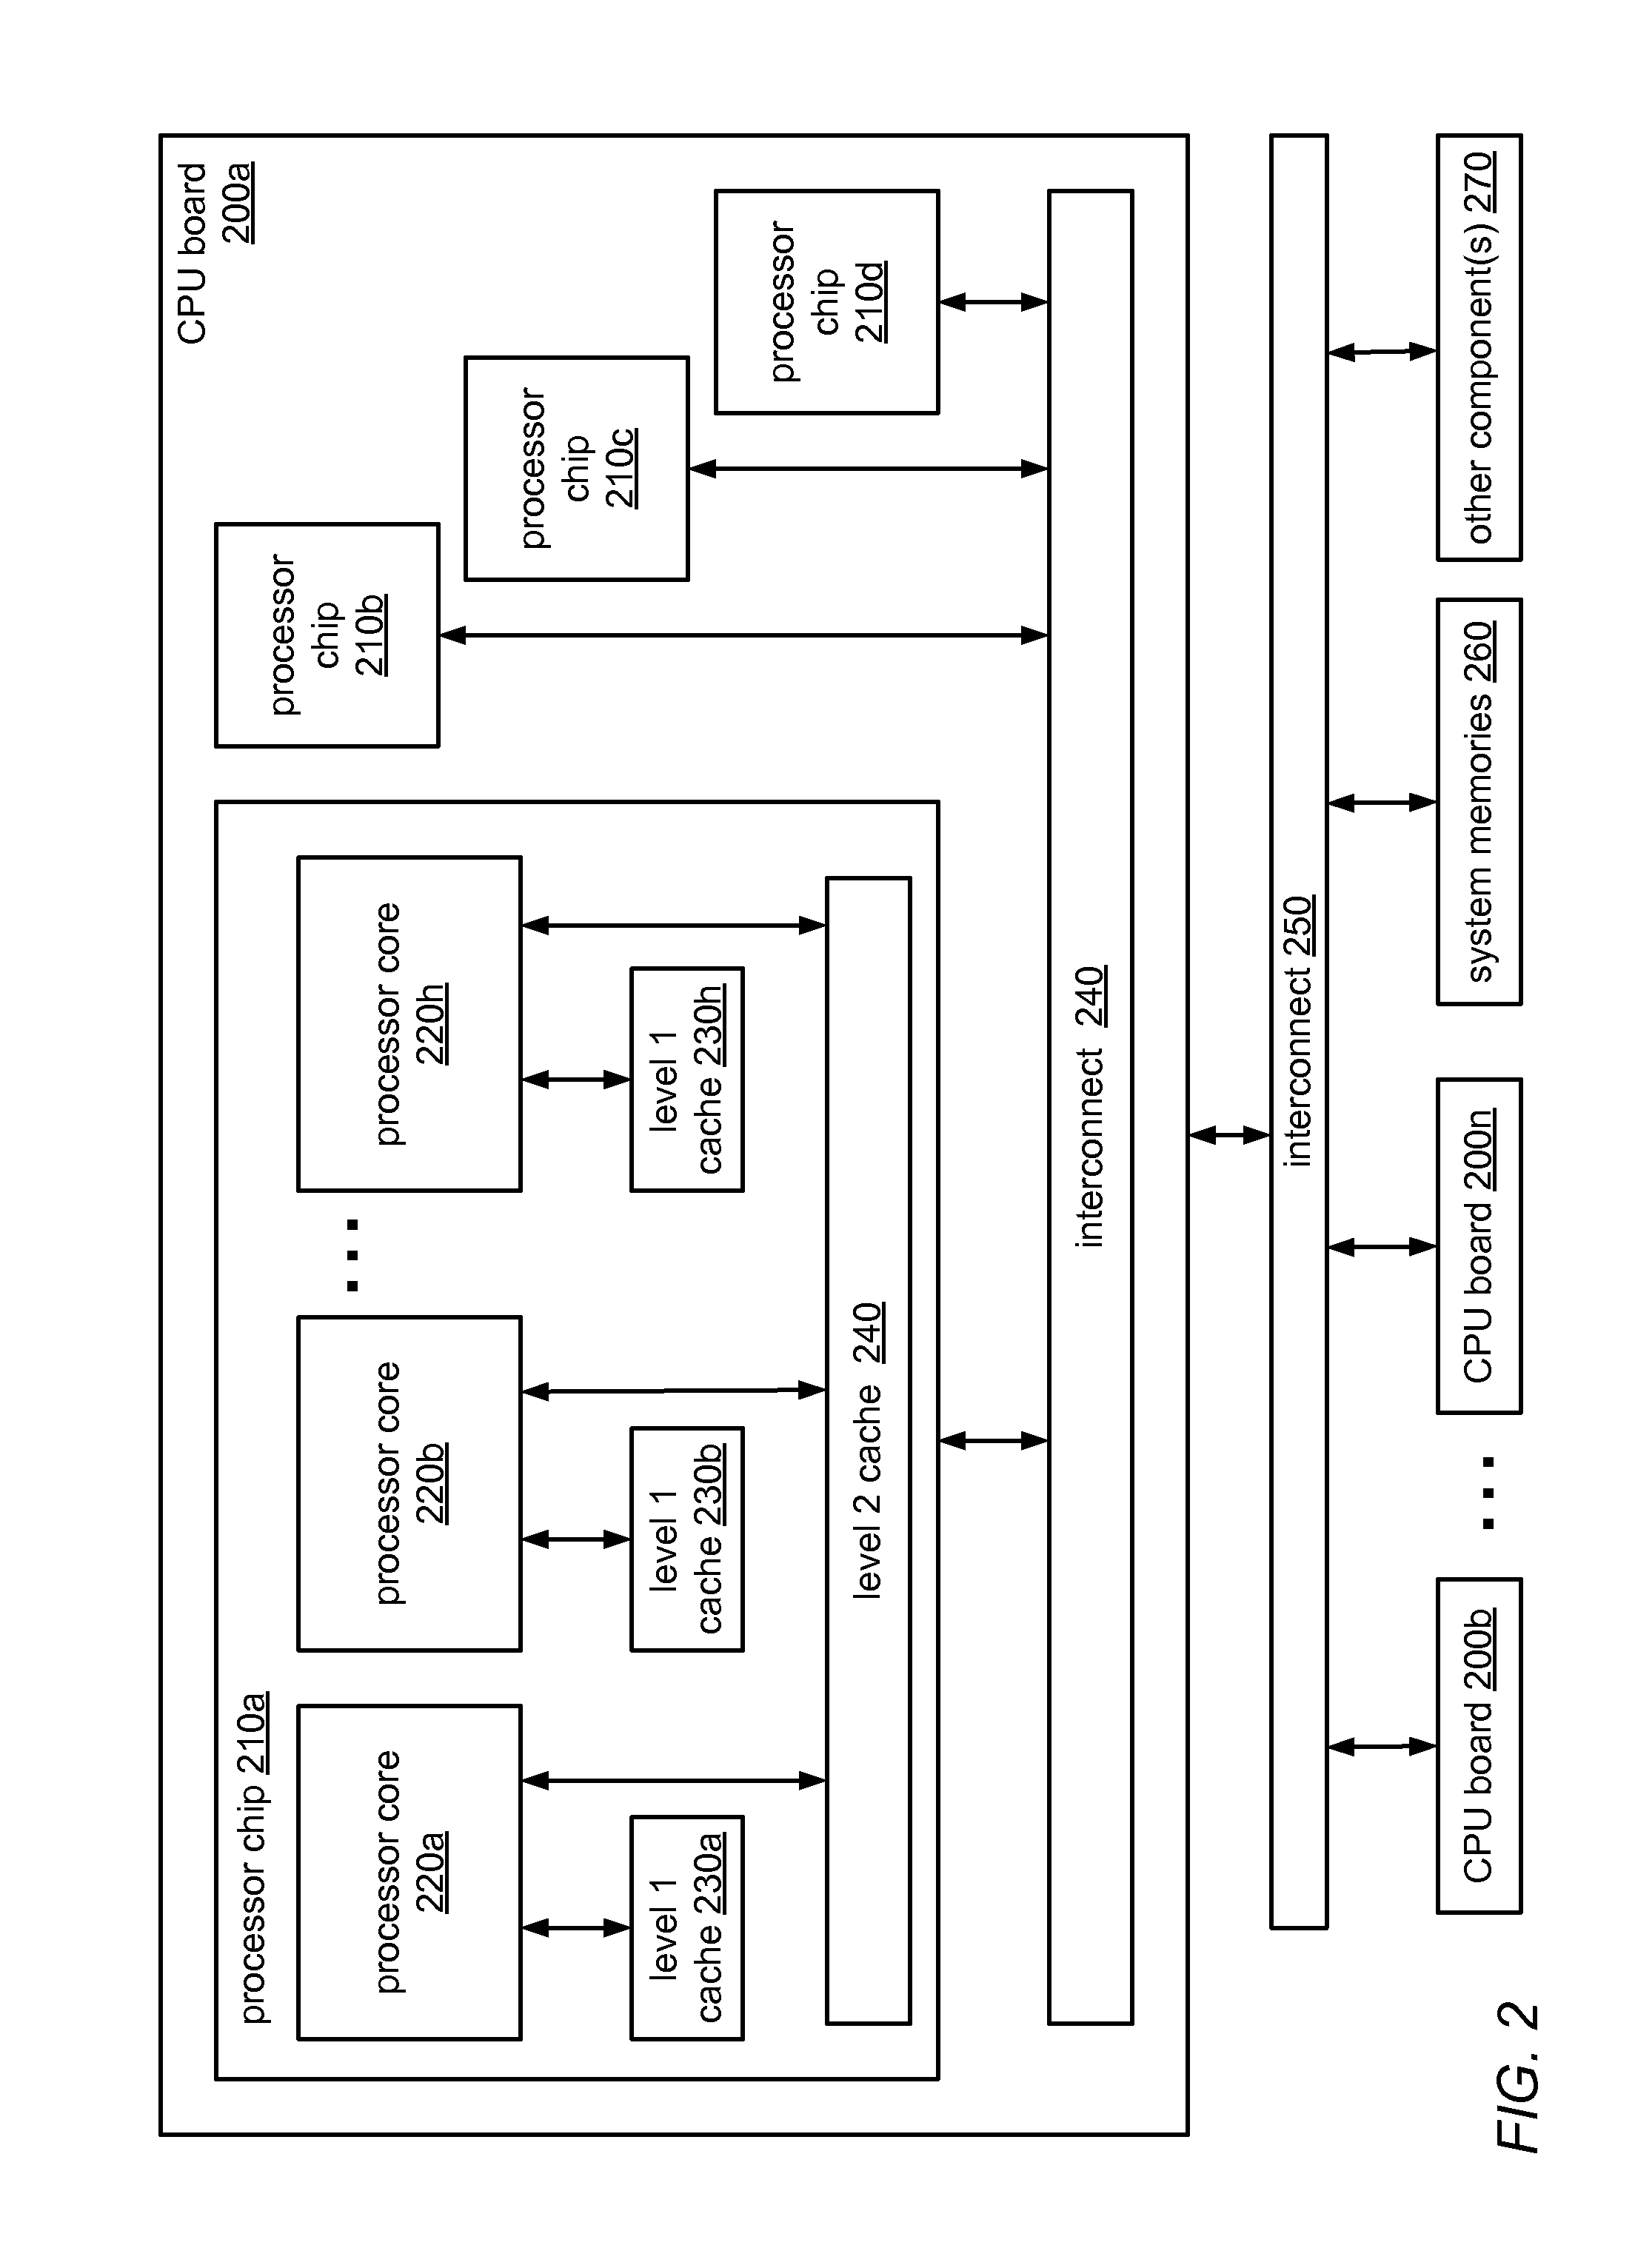 System and Method for Implementing Hierarchical Queue-Based Locks Using Flat Combining